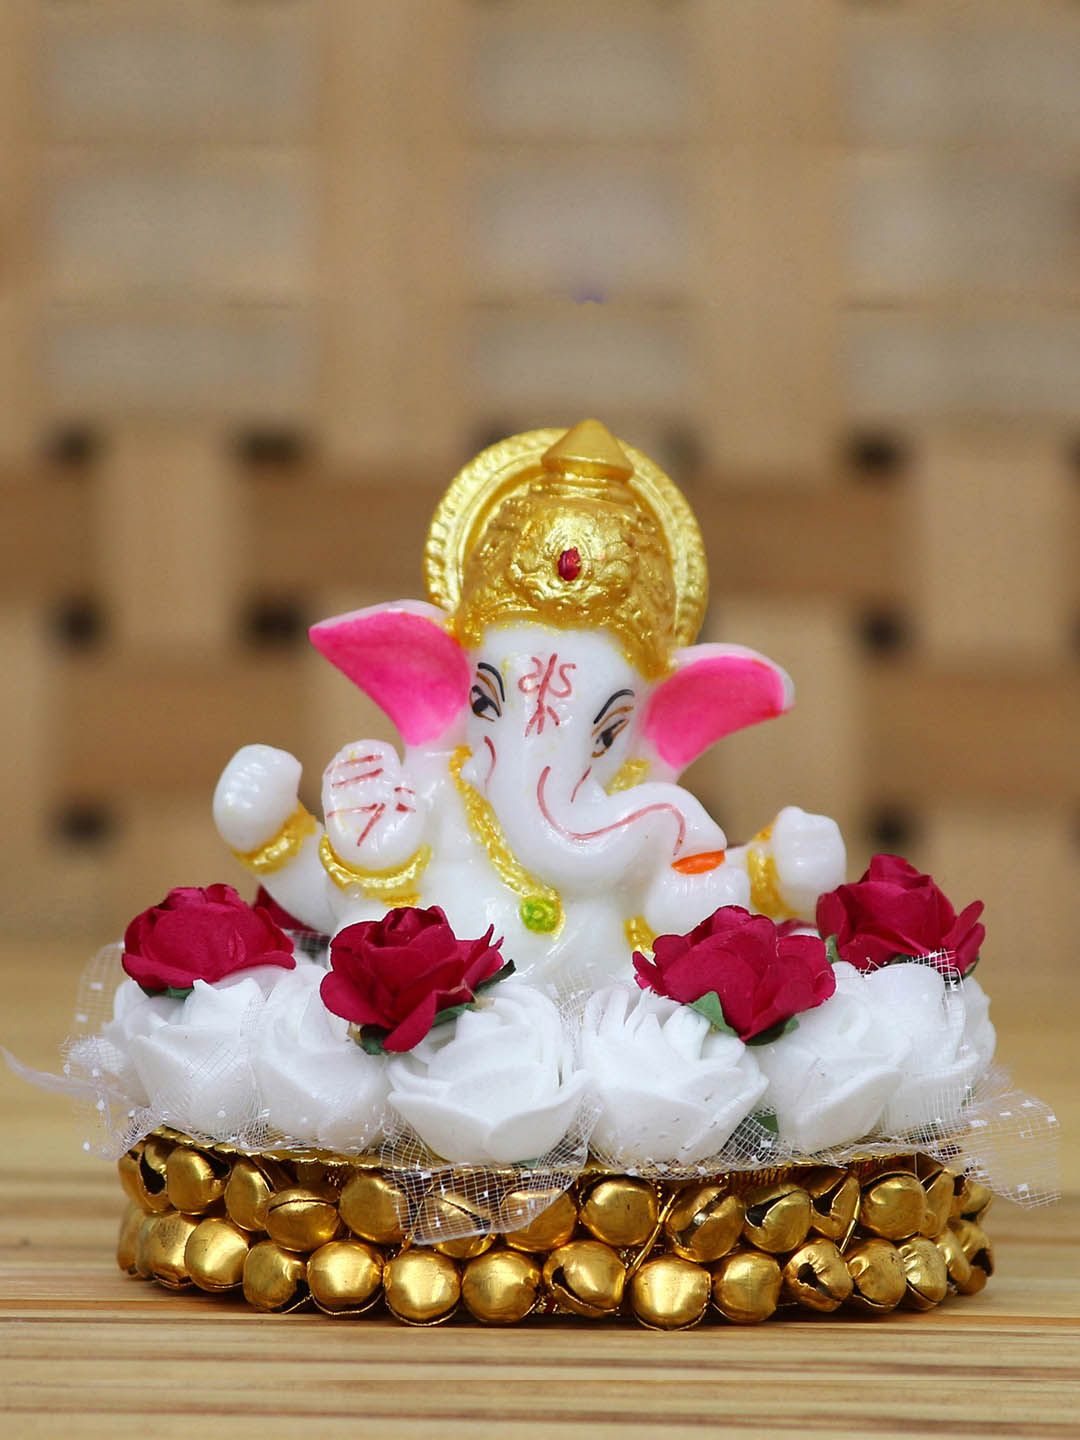 eCraftIndia White & Gold-Toned Handcrafted Lord Ganesha Idol on Decorated Plate Showpiece Price in India